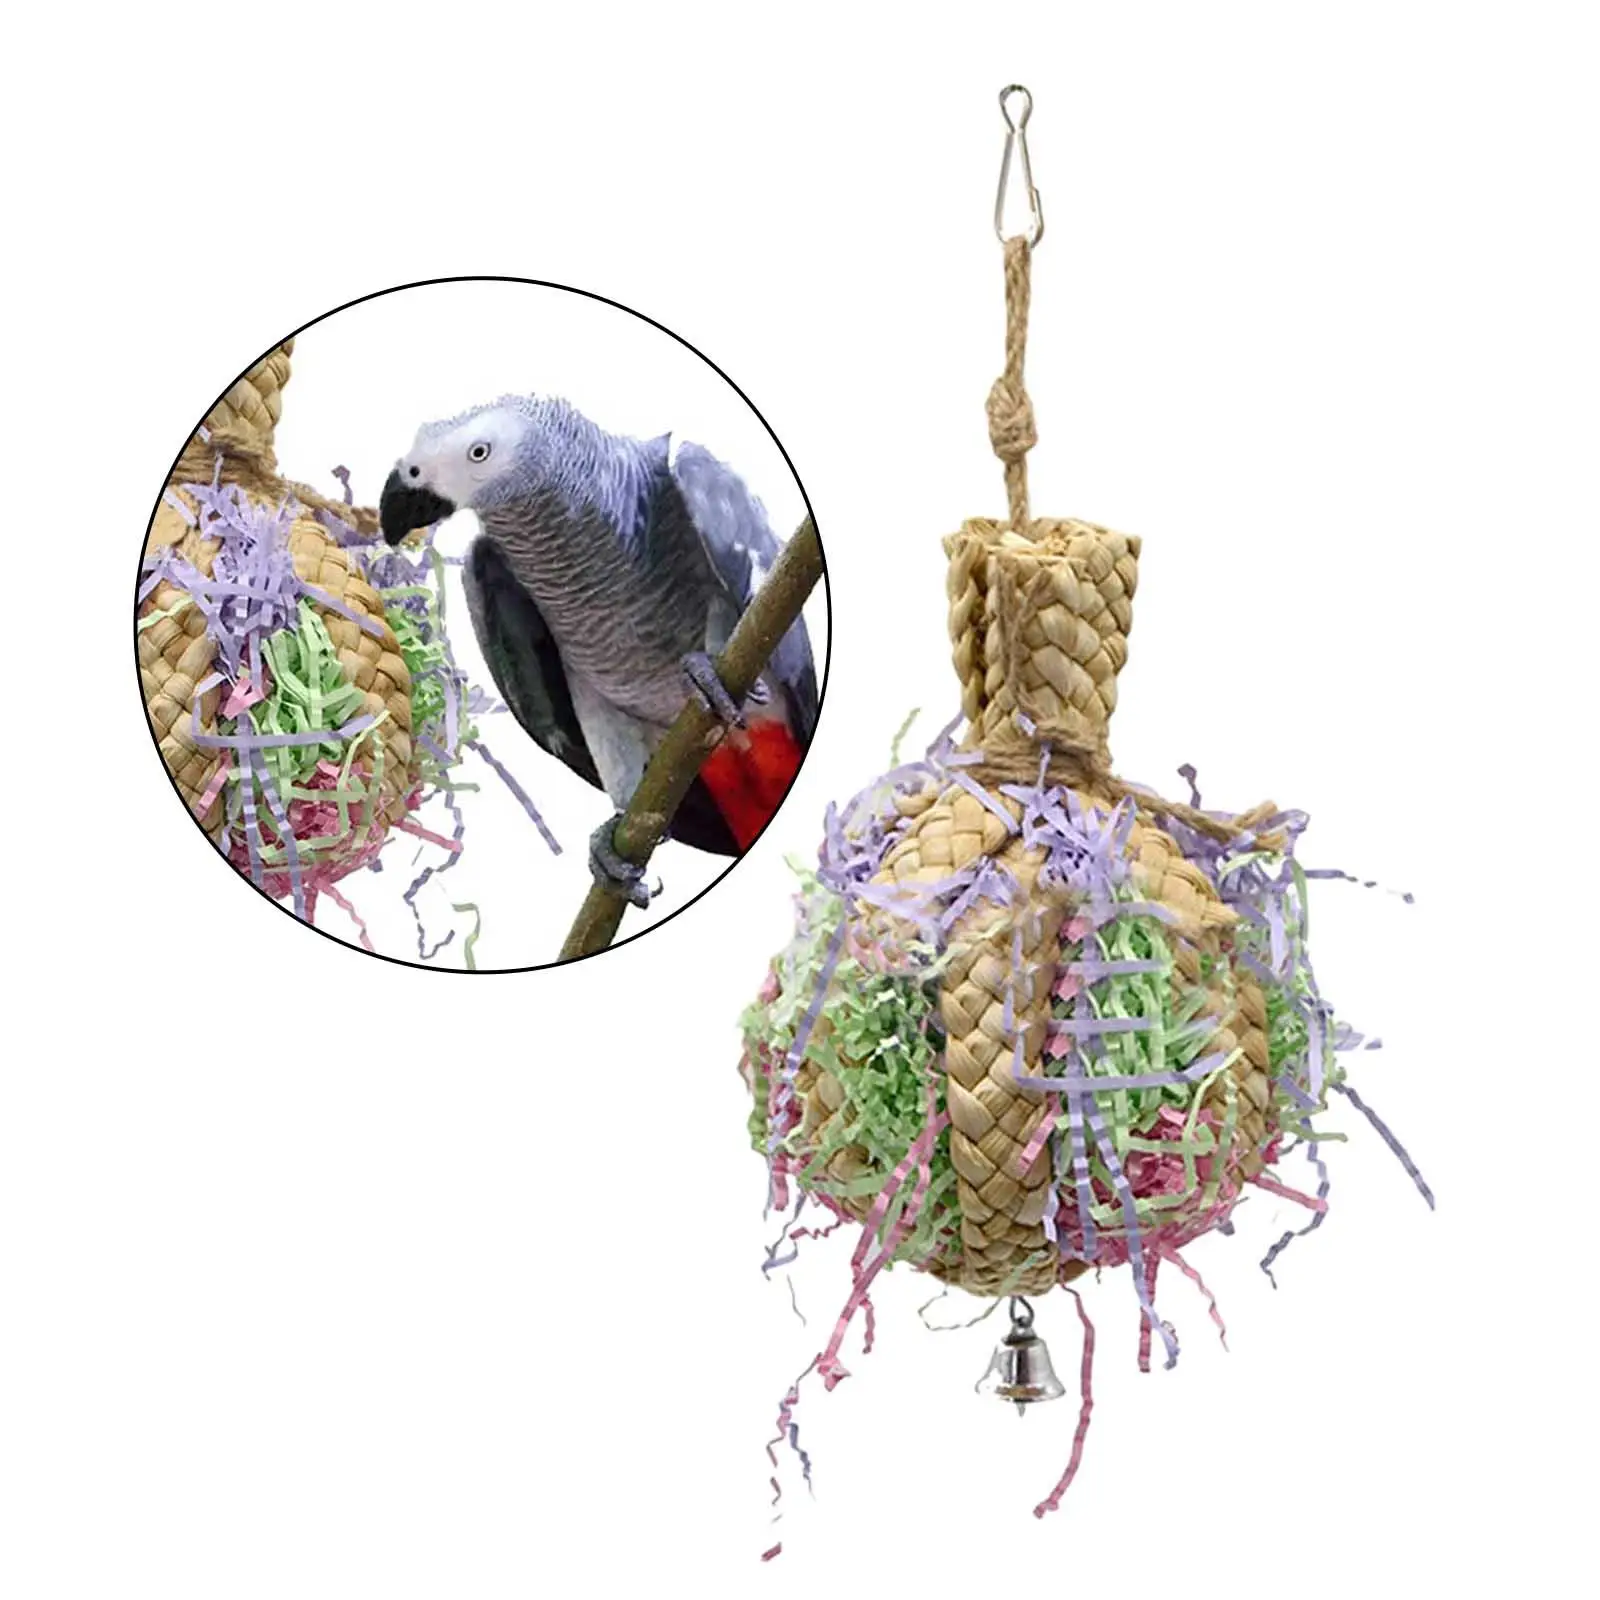 Bird Toys, Parrot Toys with Bells, Parrots Cage Chewing Toy, Multicolored Bite Toys for Macaw Cockatoo Pet Birds Accessories